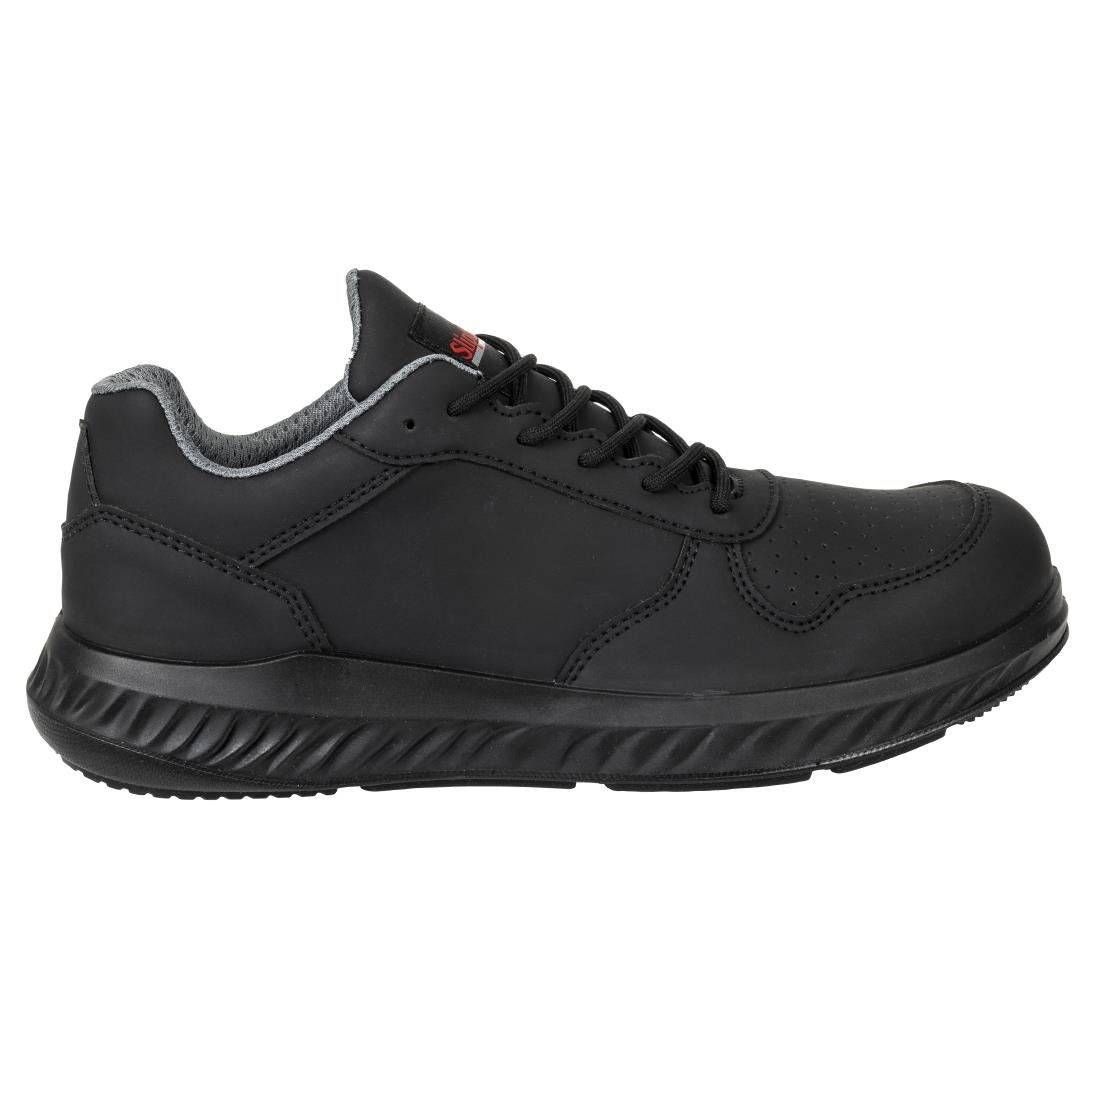 BA063-45 Slipbuster Recycled Microfibre Trainers Matte Black 45 JD Catering Equipment Solutions Ltd